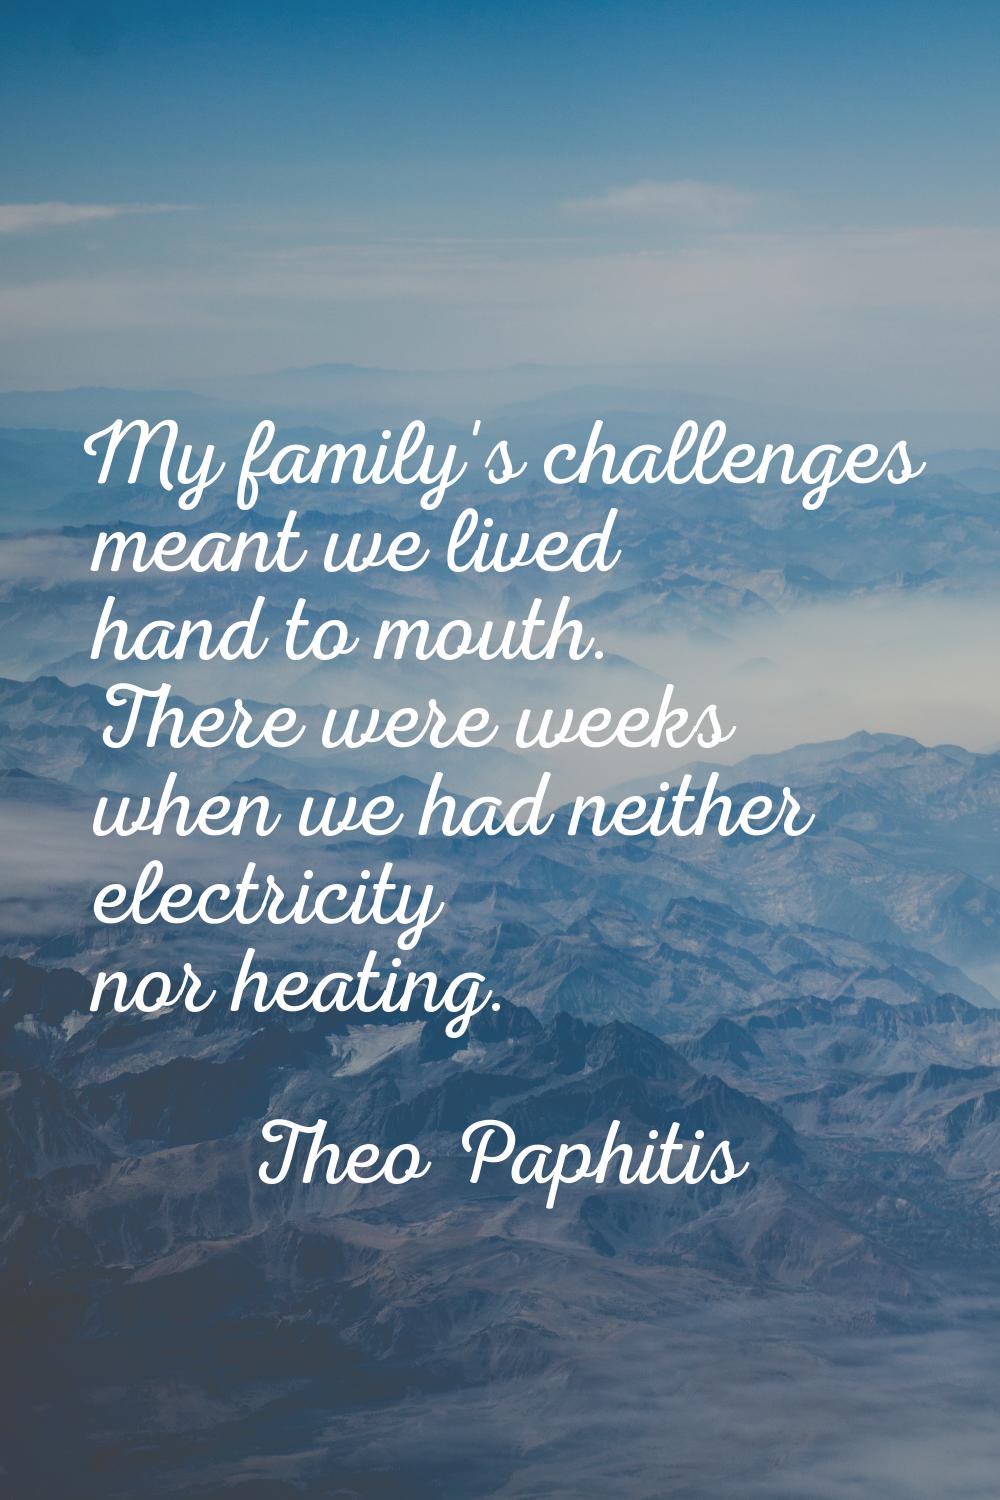 My family's challenges meant we lived hand to mouth. There were weeks when we had neither electrici